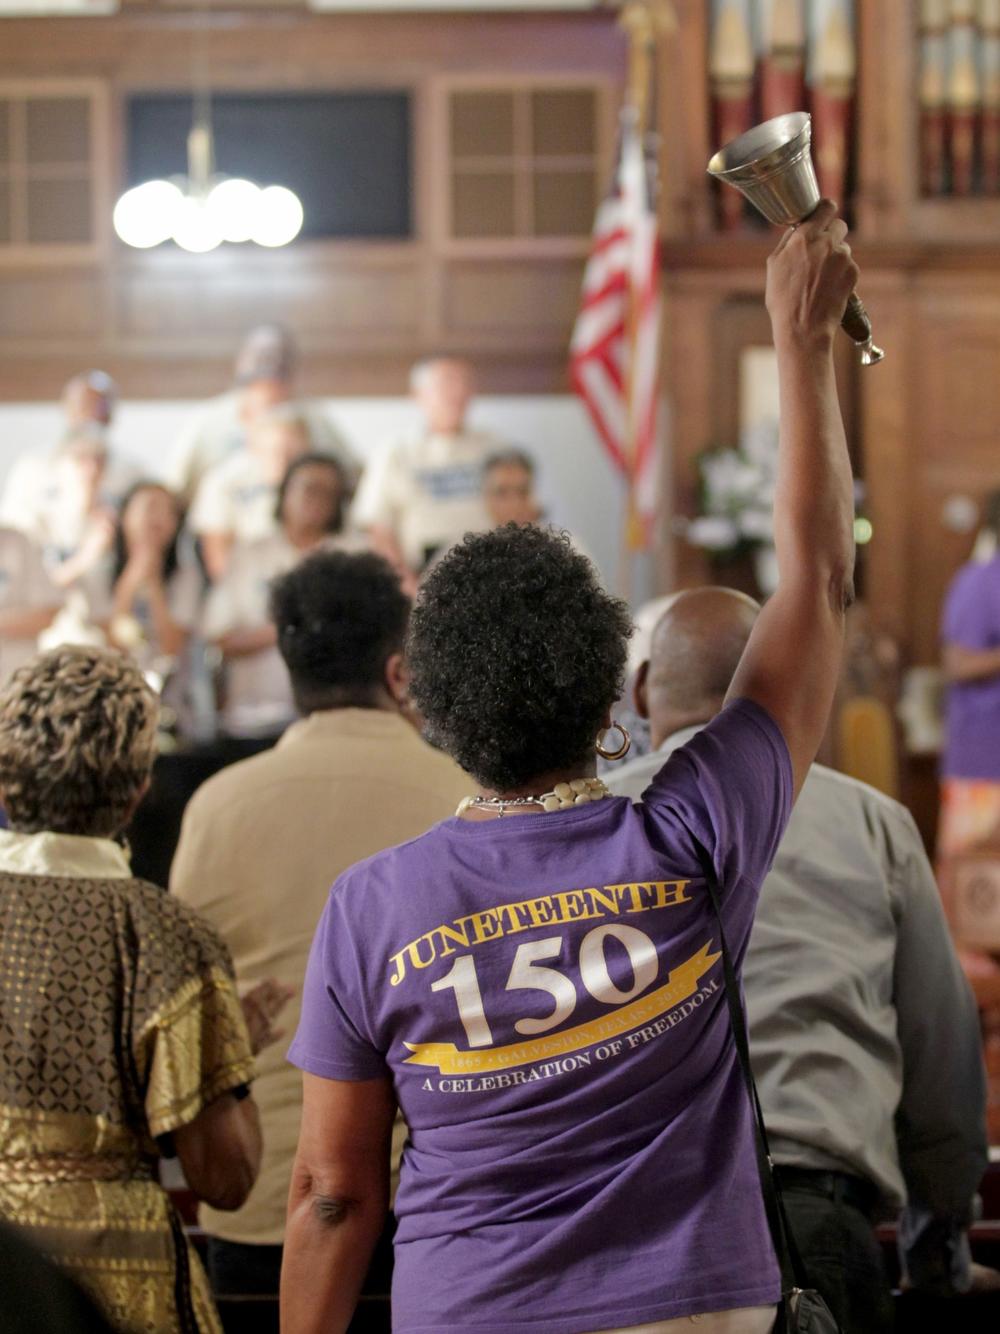 Congregants celebrate Juneteenth at Reedy Chapel African Methodist Episcopal Church in Galveston, Texas, on Sunday, June 19, 2016, following the annual march from the Old Galveston County Courthouse.